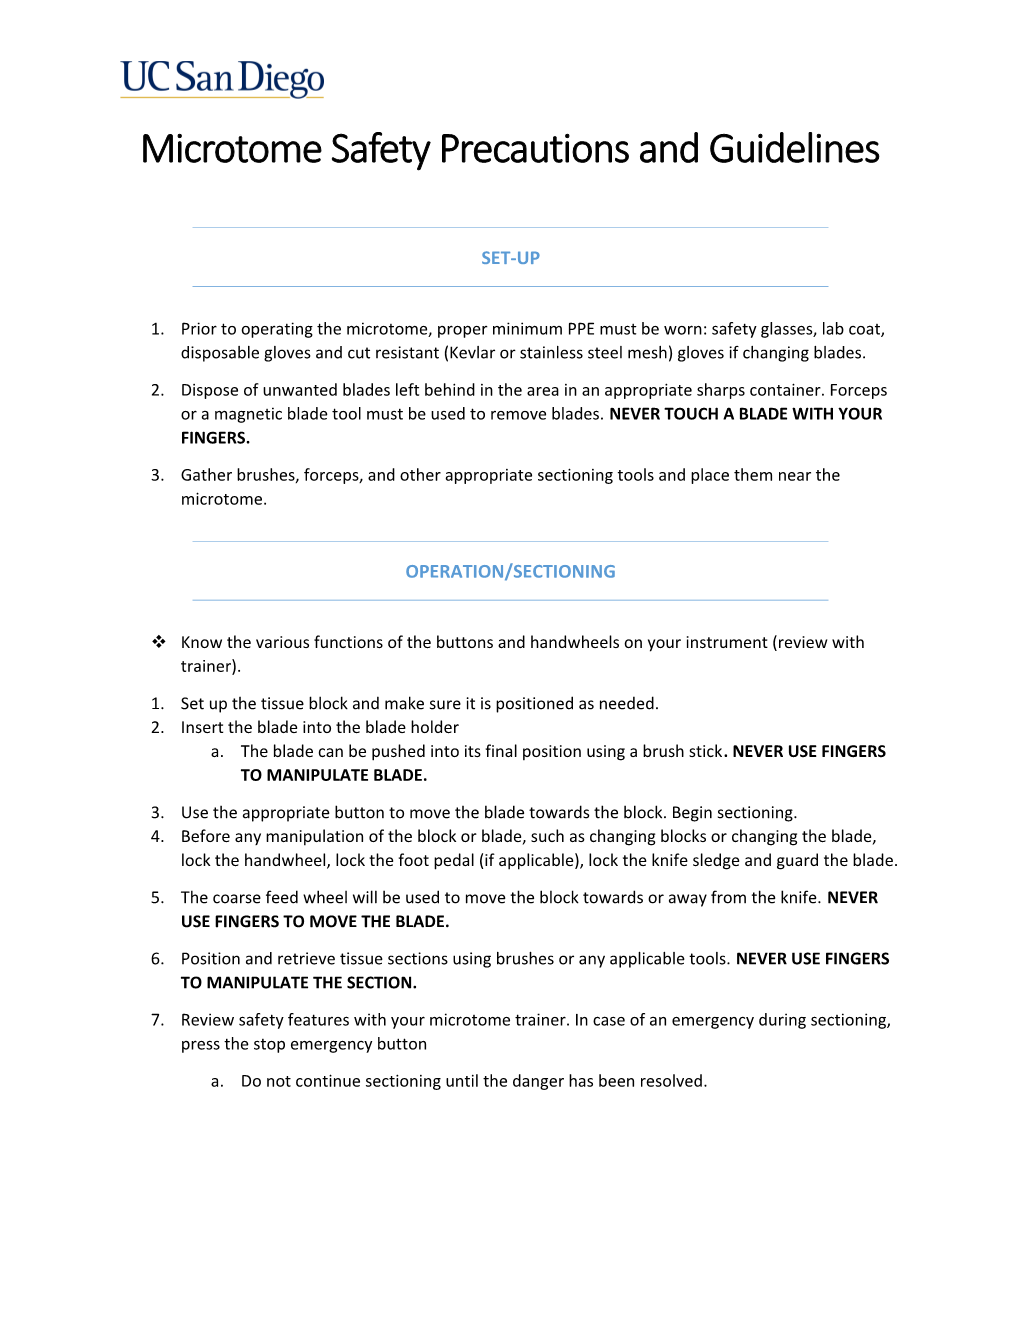 Microtome Safety Precautions and Guidelines